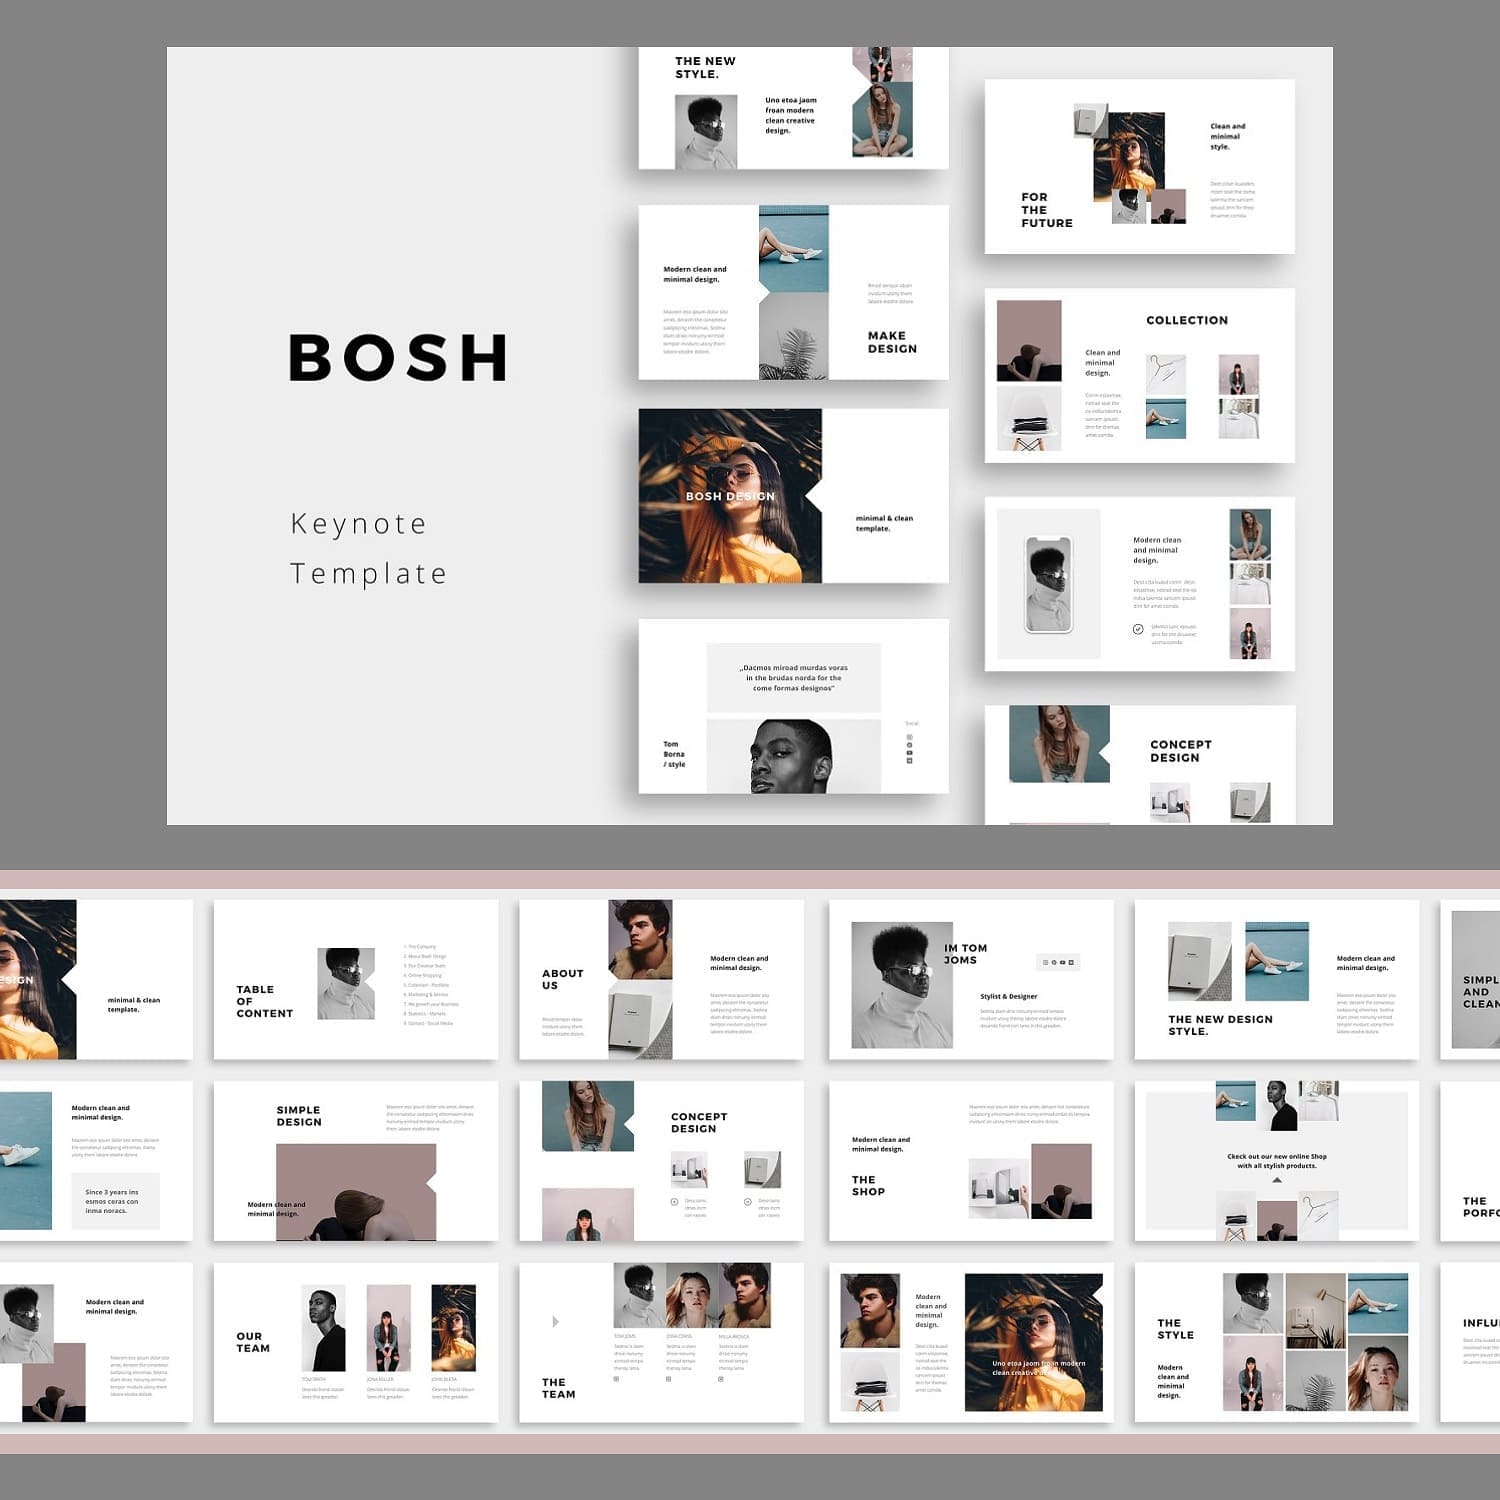 Slide with information about Bosh team.